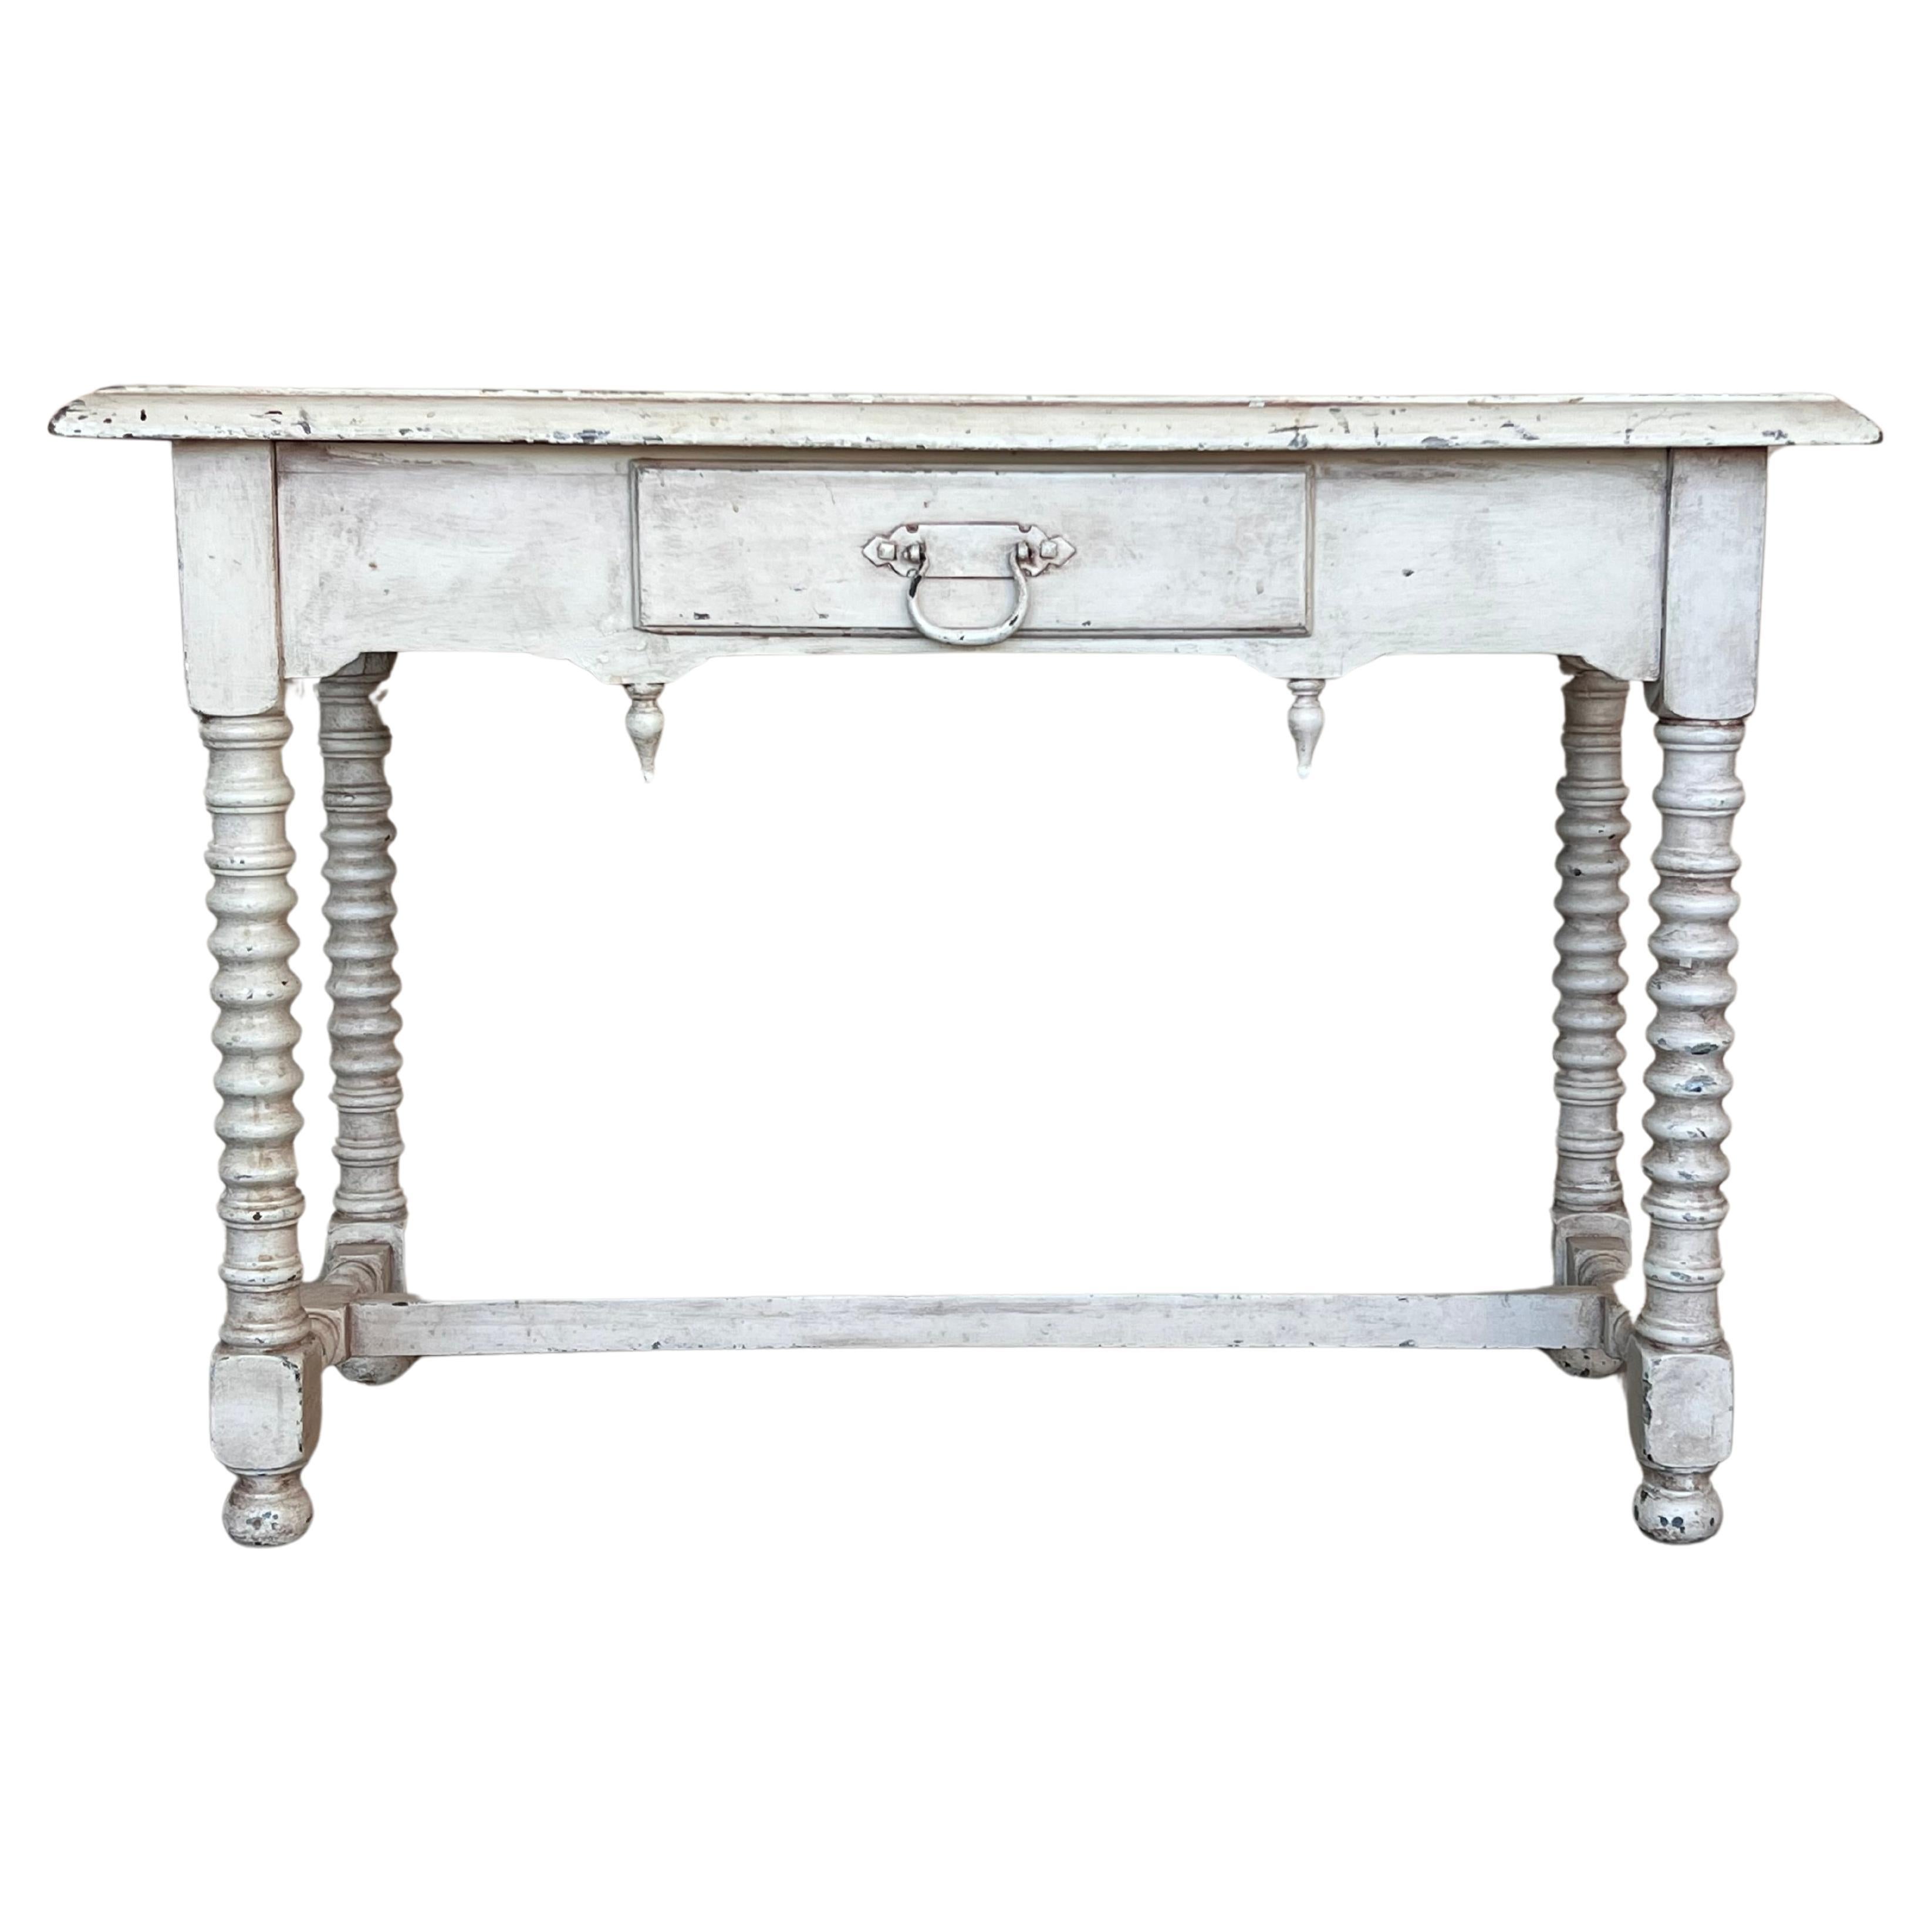 Rustic Antique Farmhouse Harvest Spanish Table with drawer